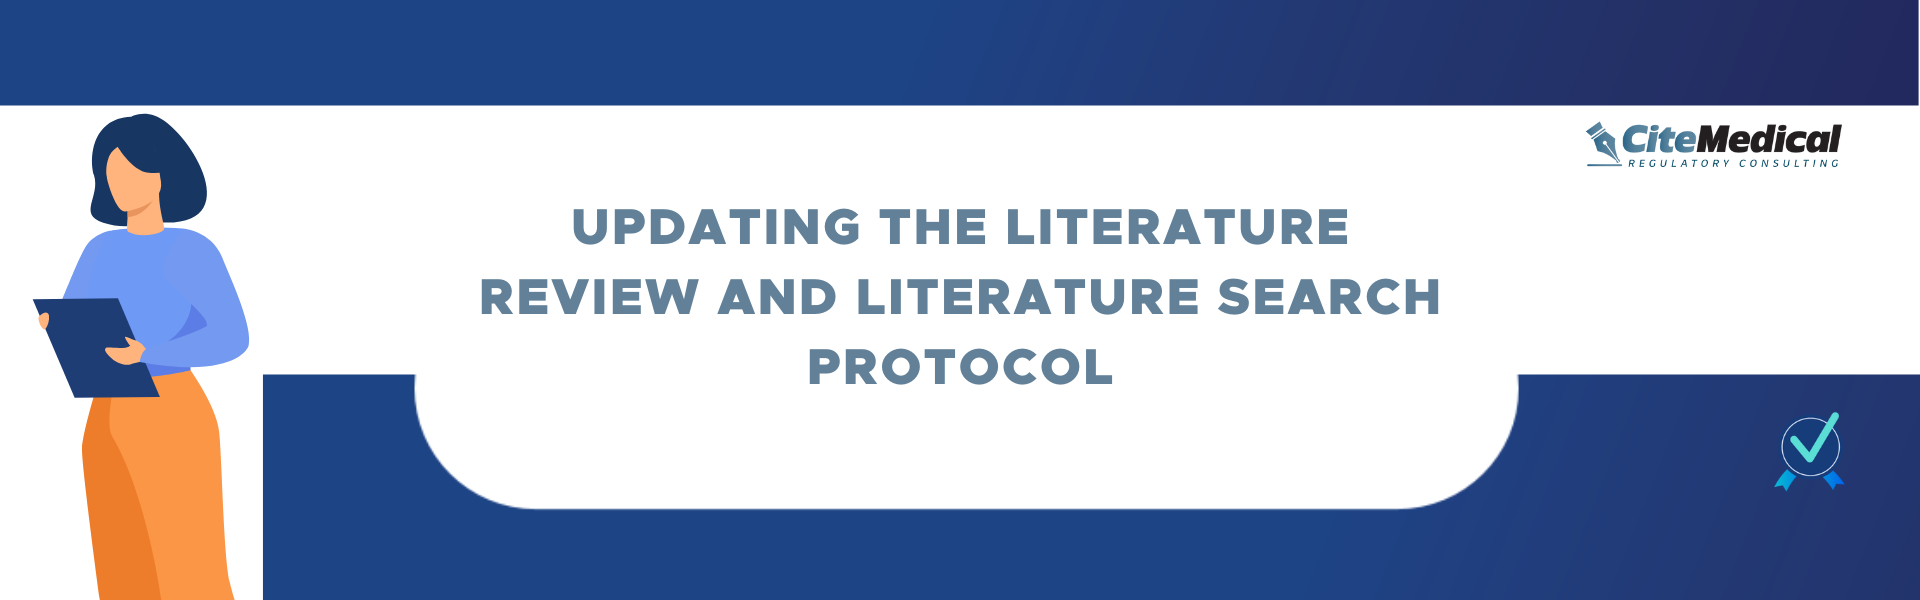 Updating the Literature Review and Literature Search Protocol